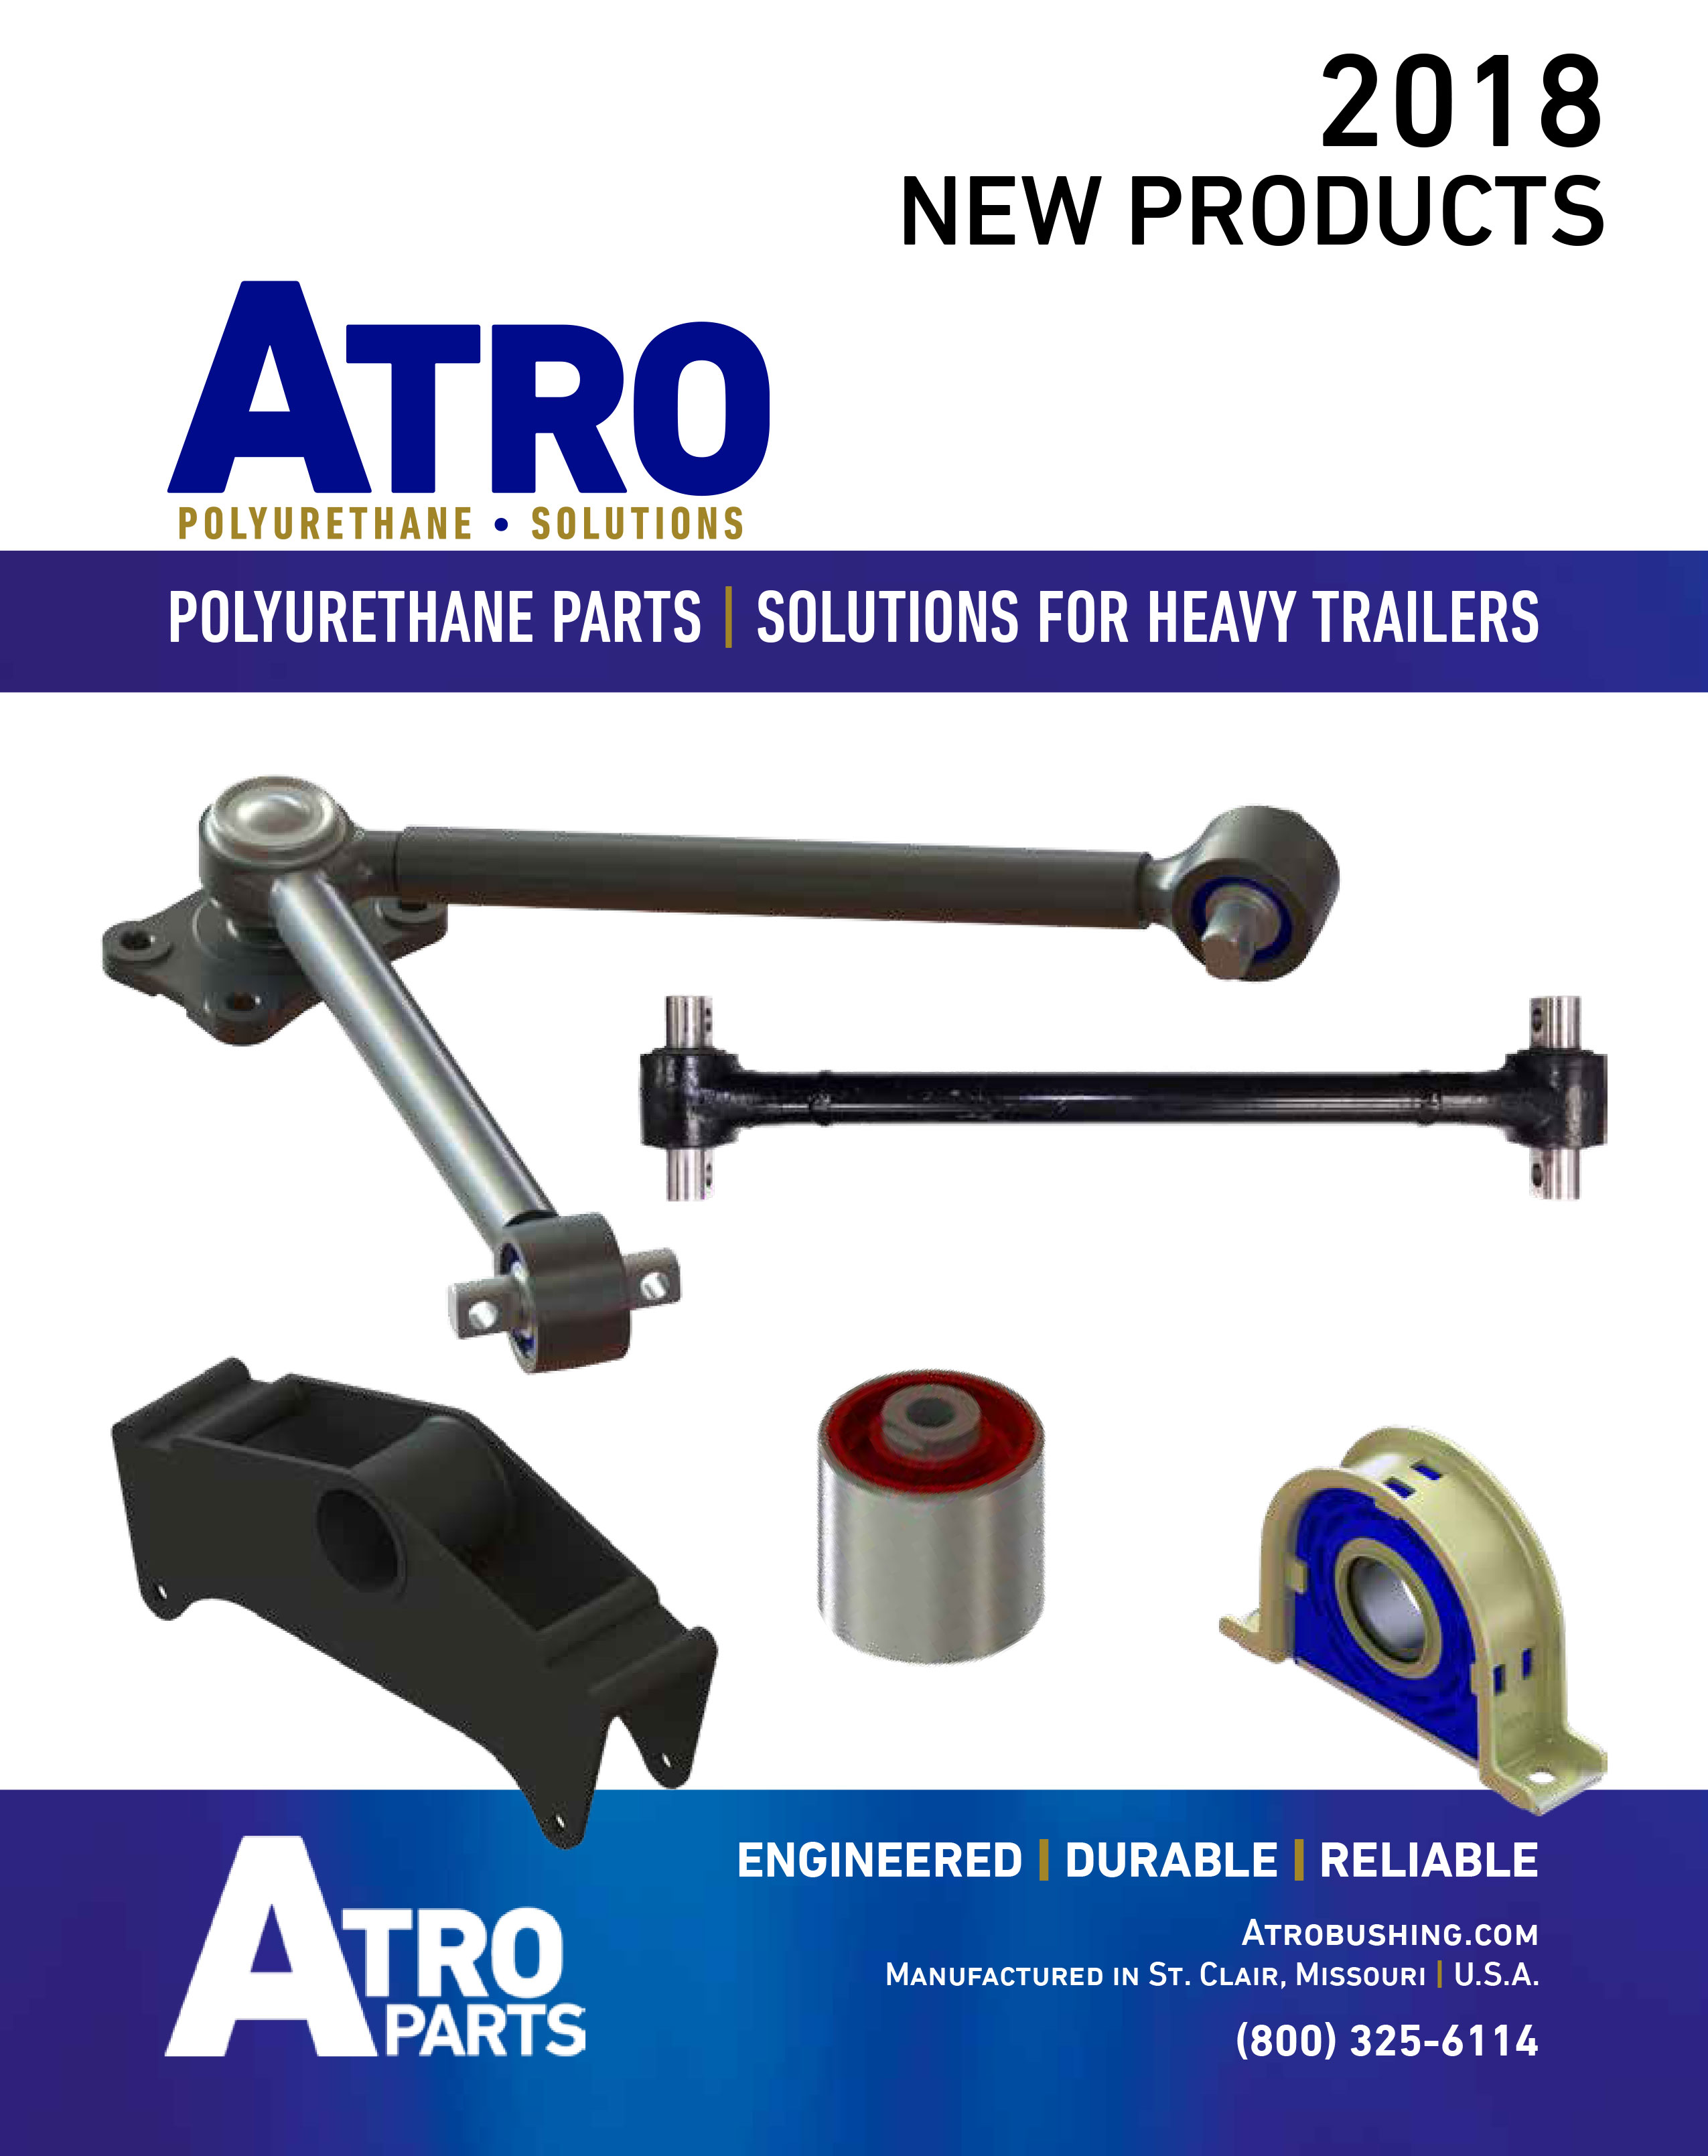 ATRO 2018 New Products (Catalog Supplement)